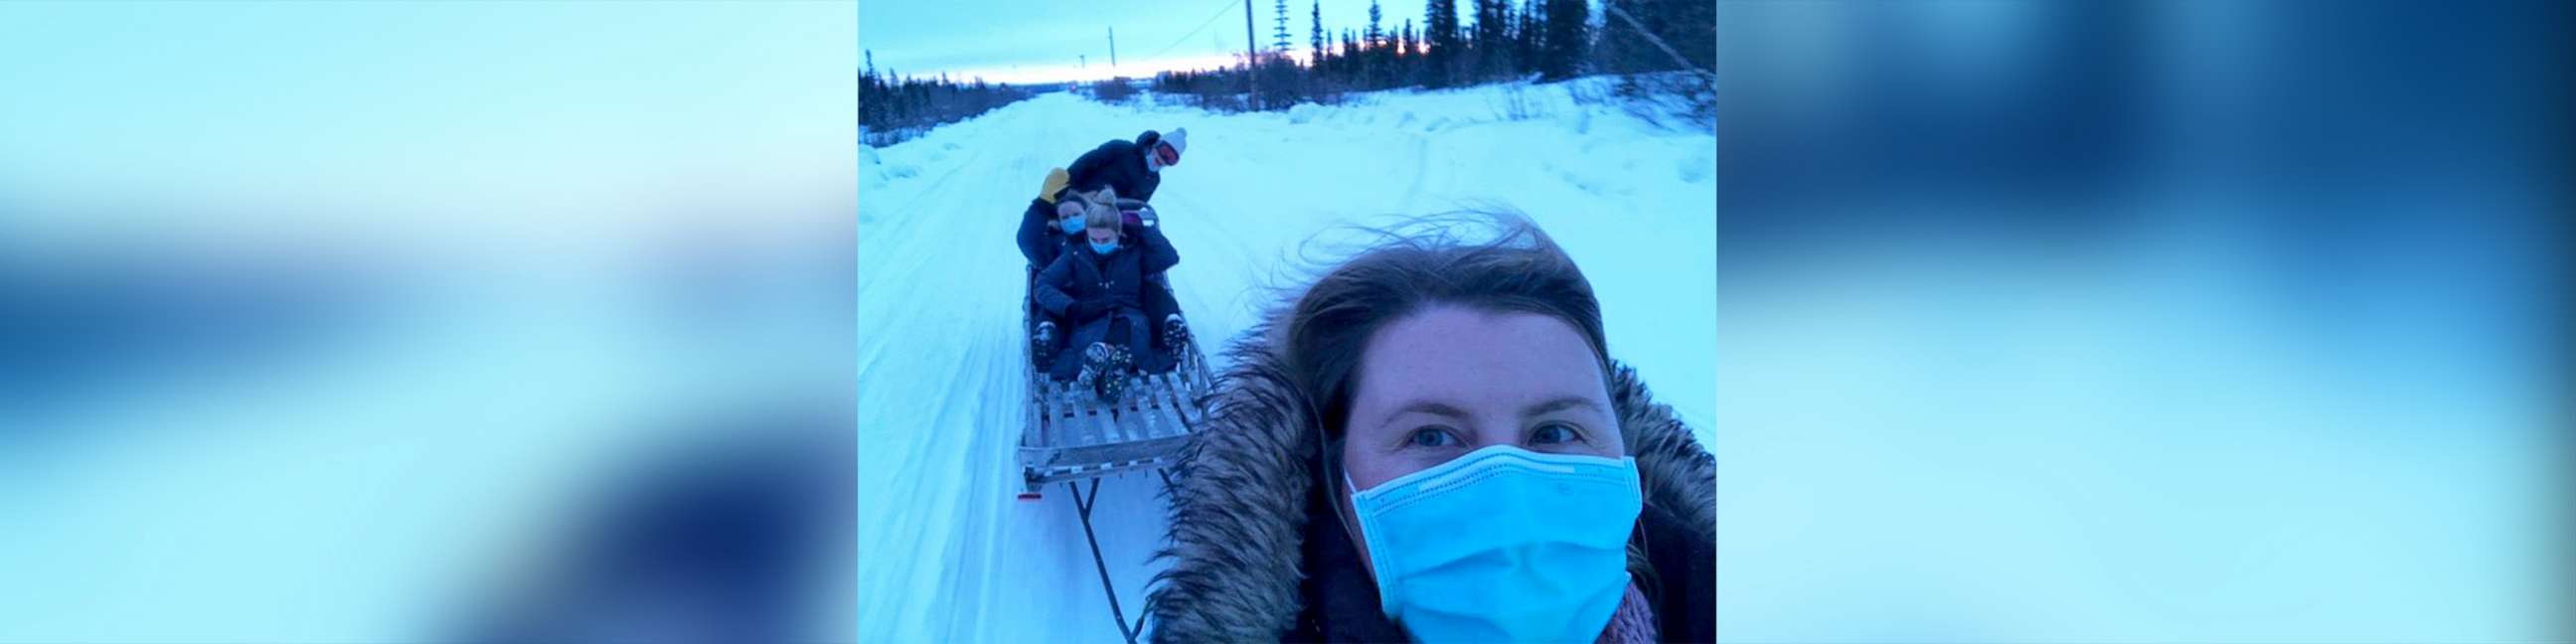 PHOTO: Dr. Katrine Bengaard and three fellow female healthcare workers deliver COVID-19 vaccines to people in rural Alaska.